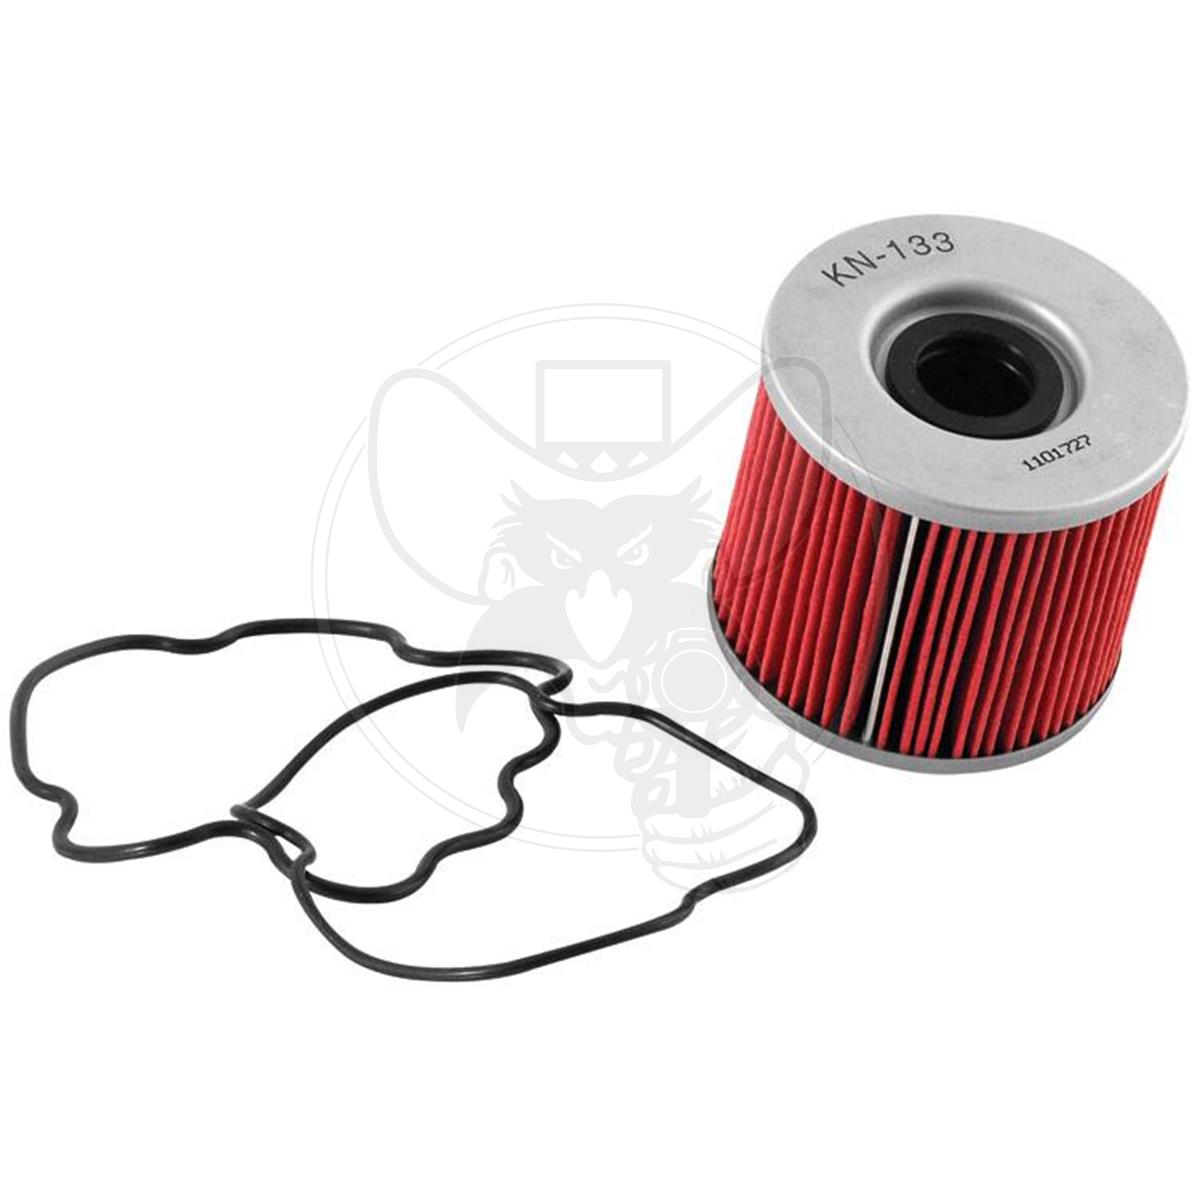 KN-133 - K&N MOTORCYCLE OIL FILTER FITS SUZUKI AND GS